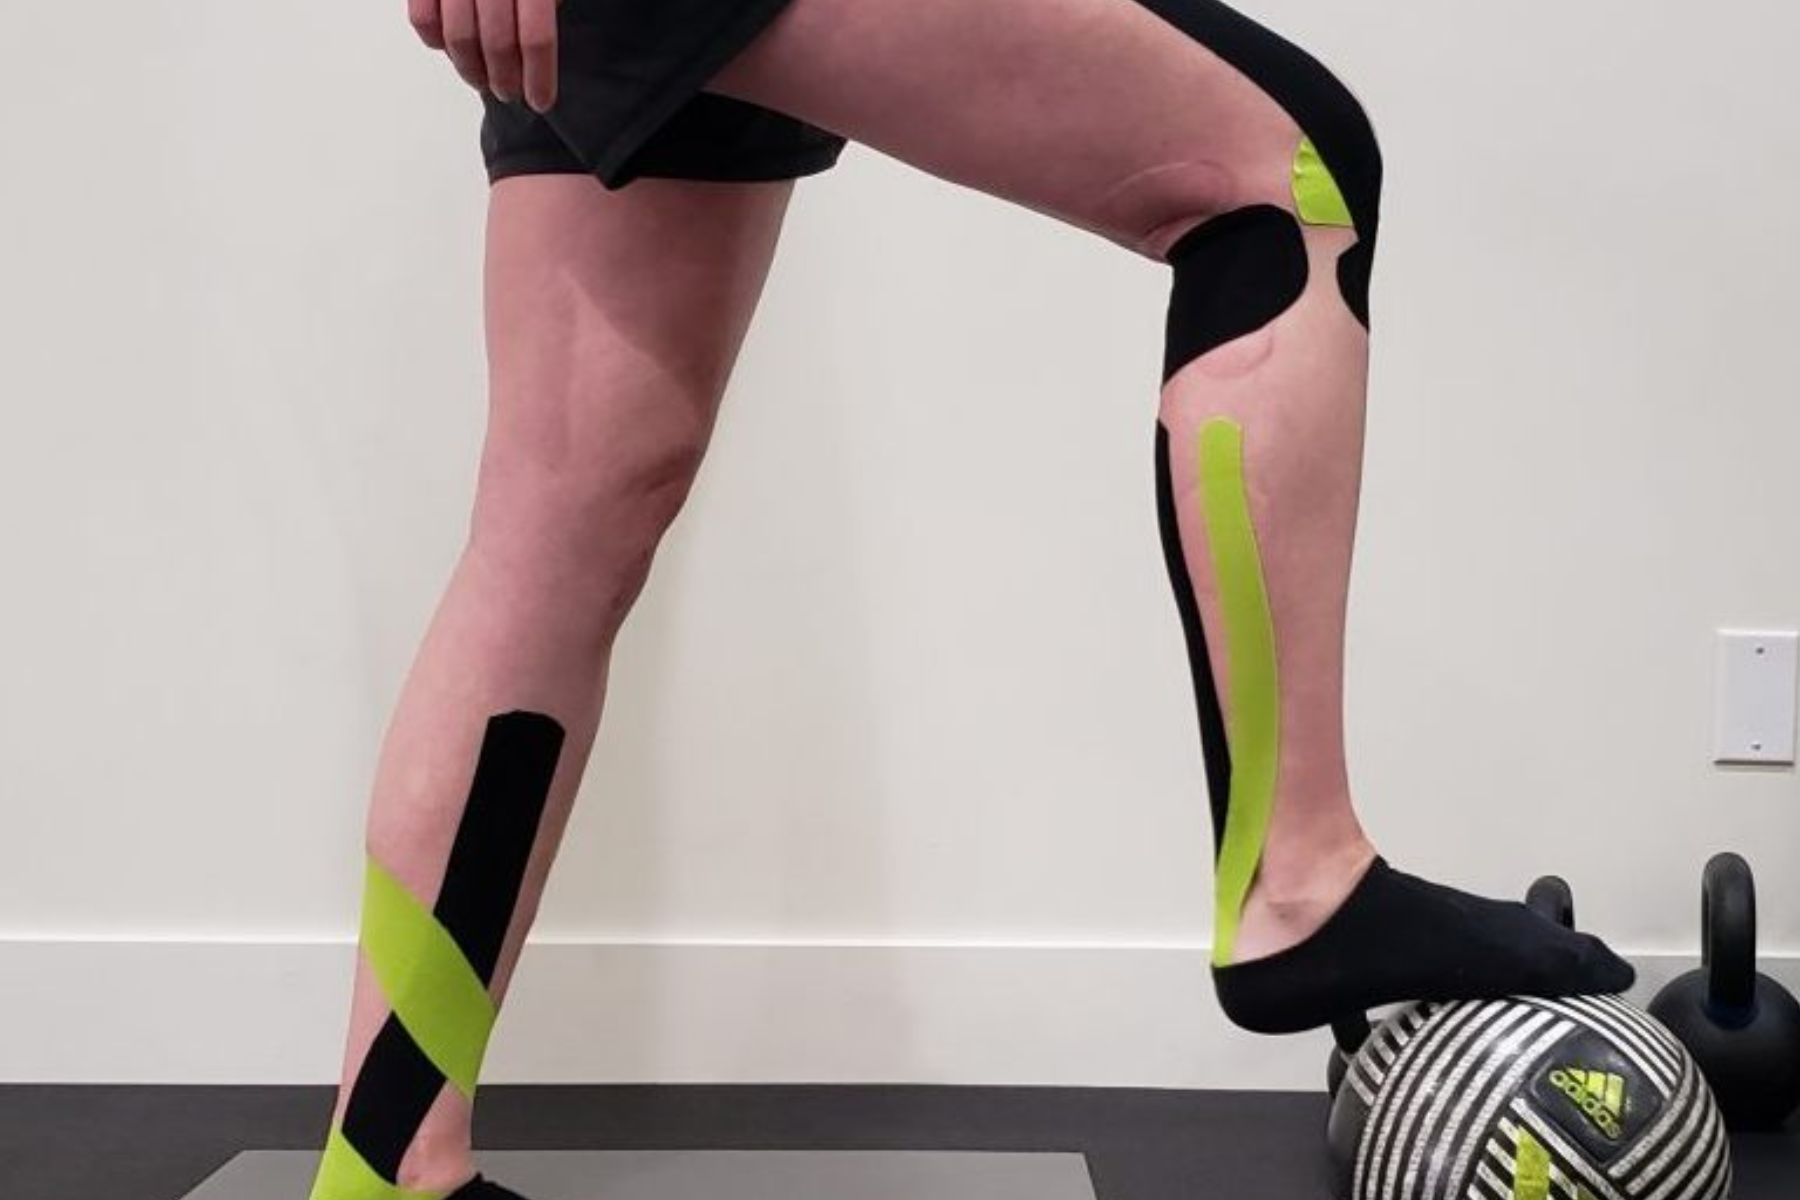 Athlete's legs with electrical tapes